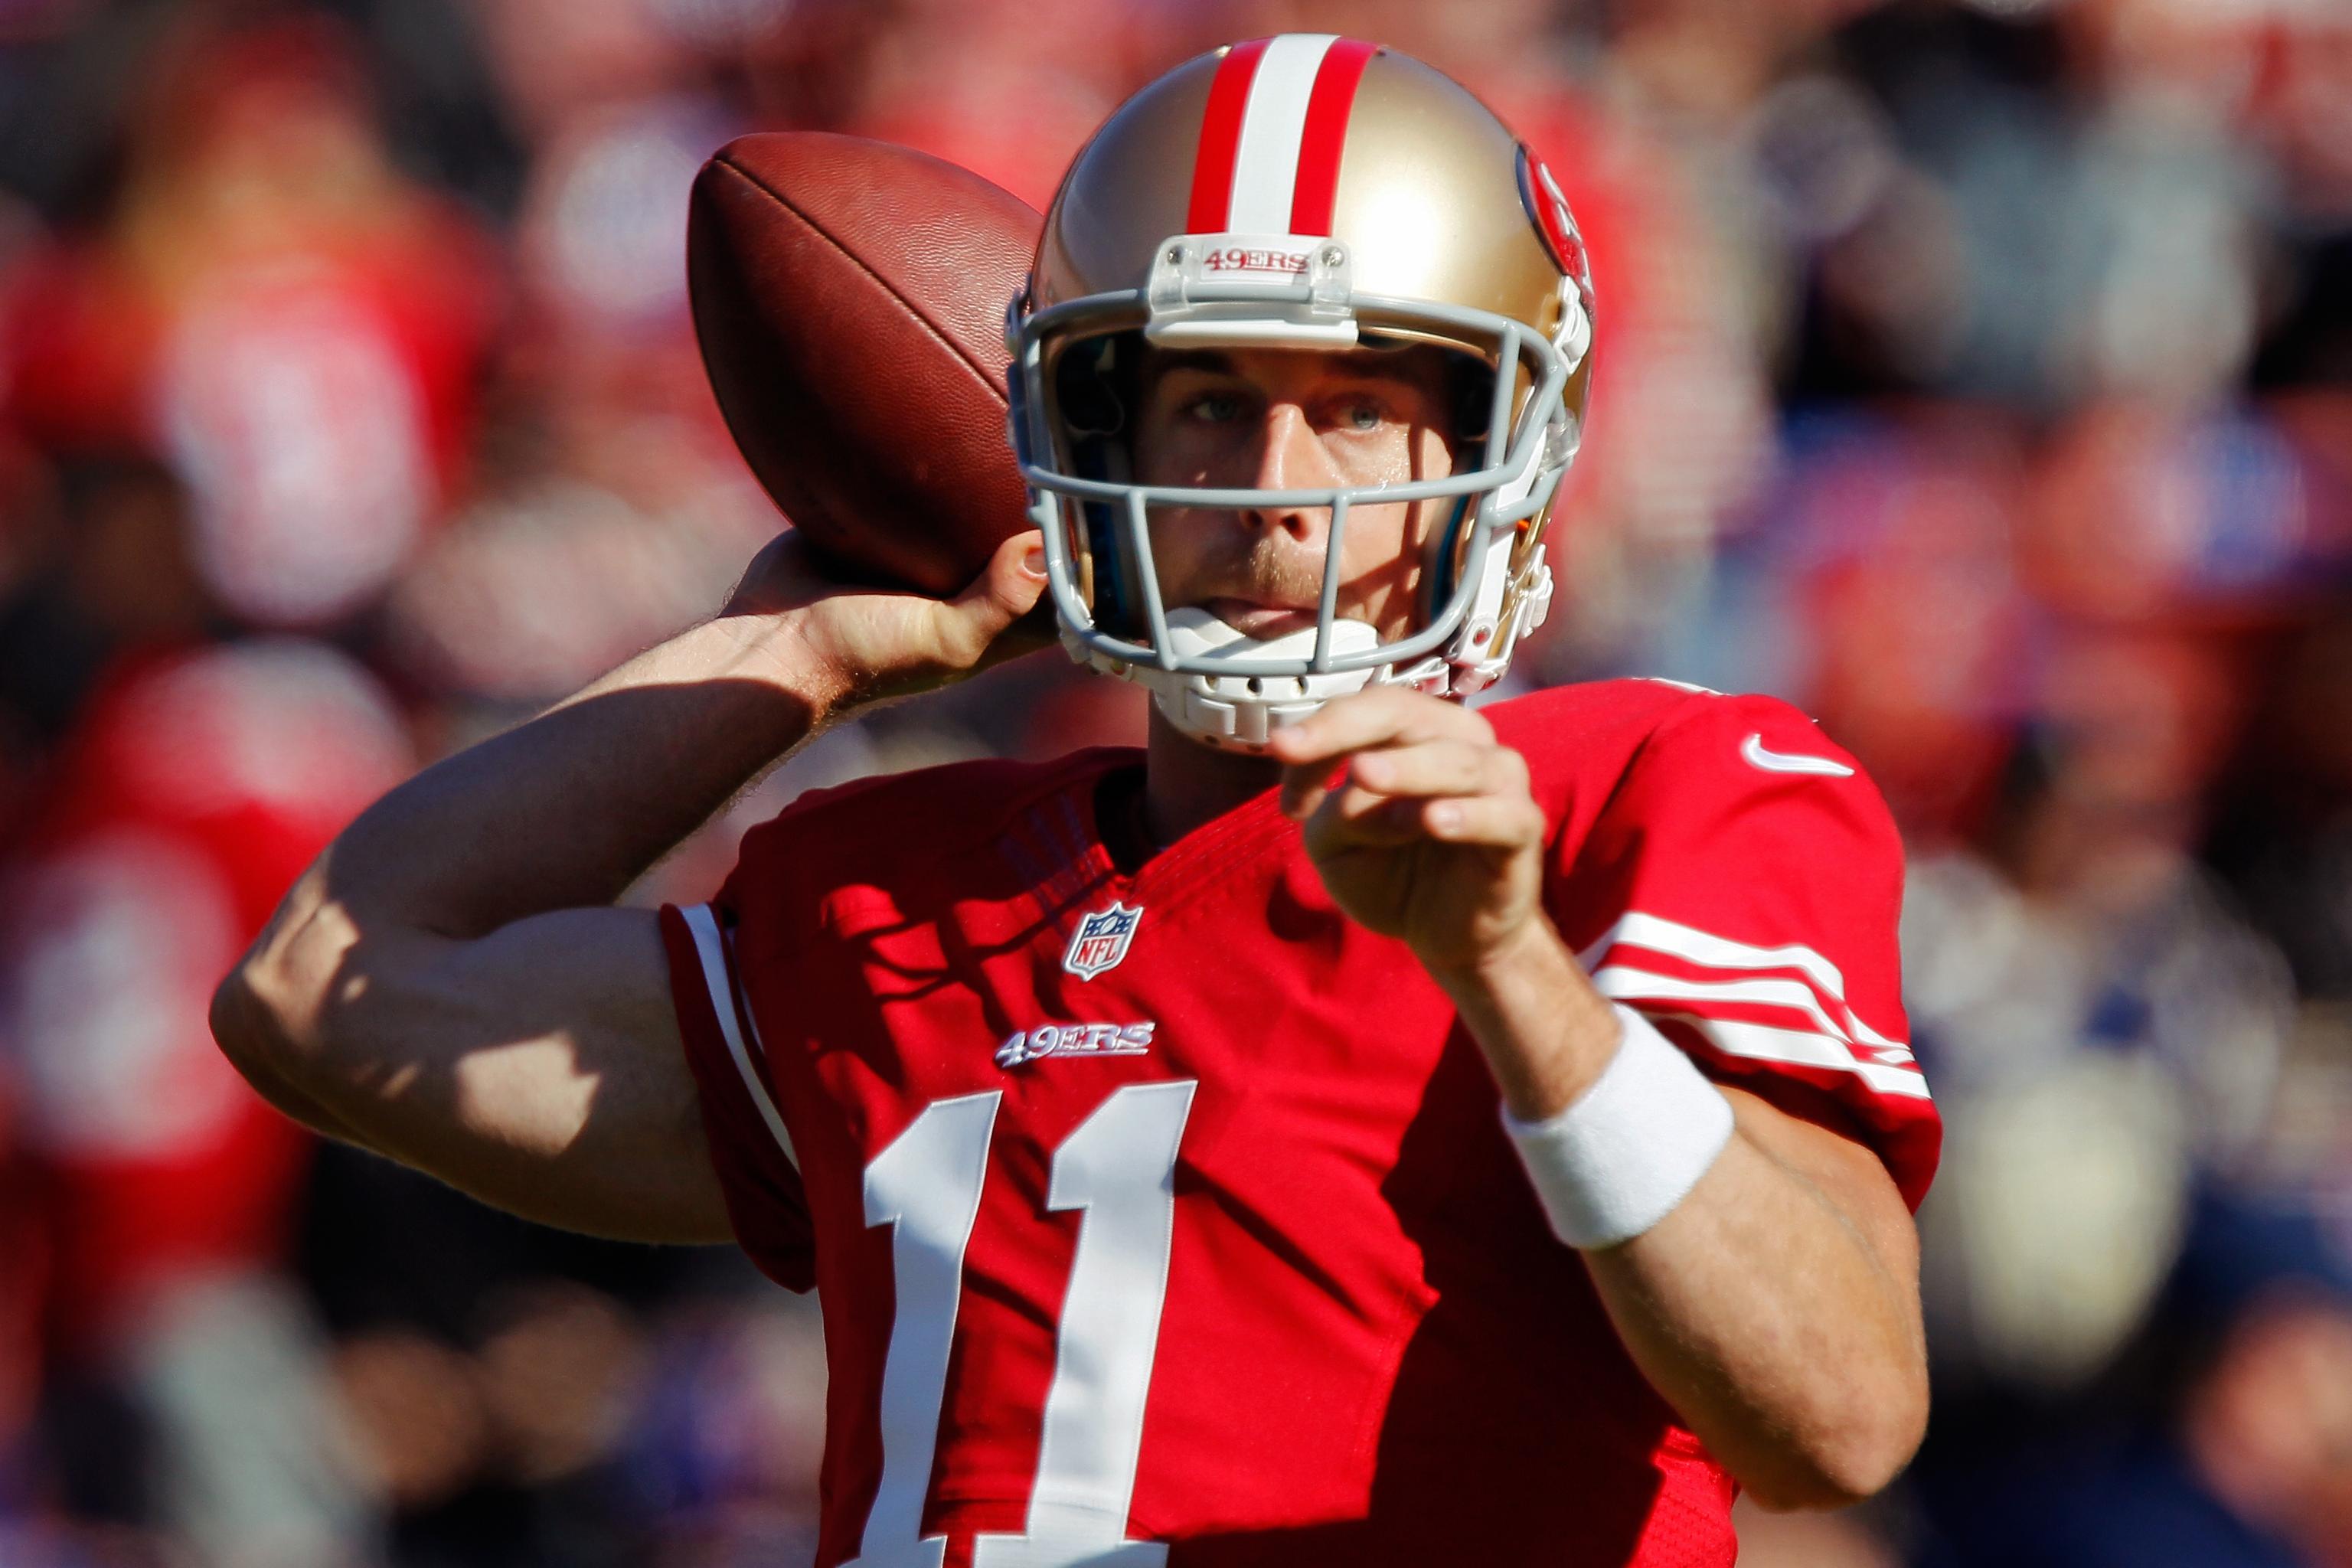 Patience has paid off for 49ers quarterback Alex Smith – The Denver Post